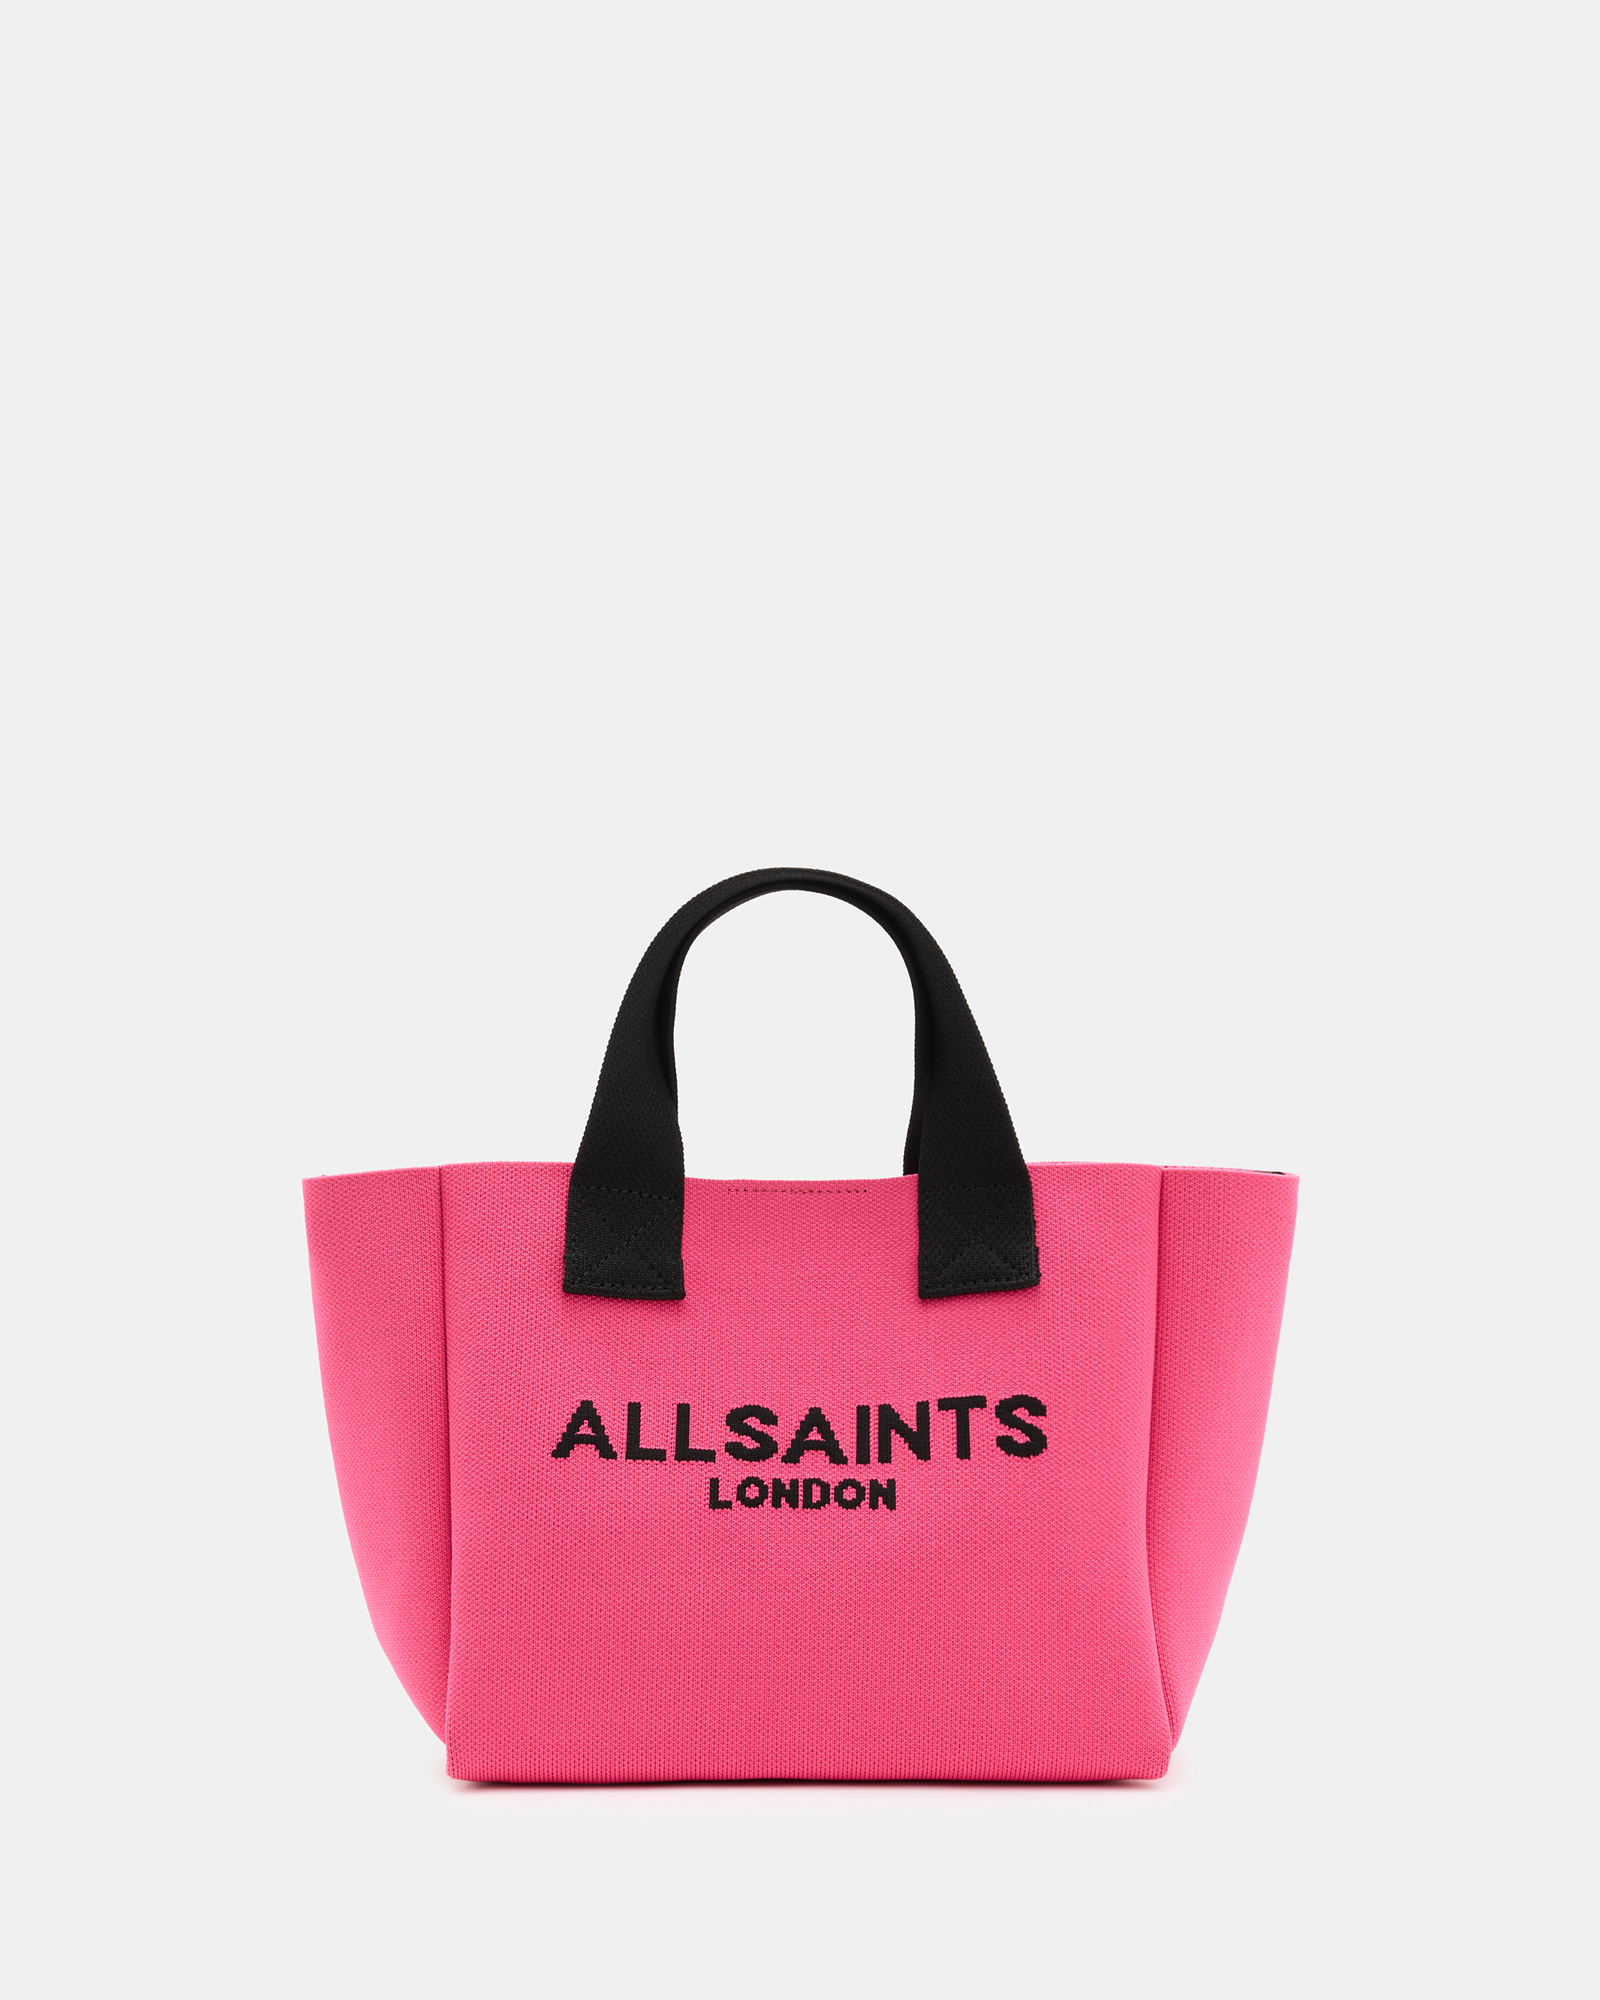 AllSaints Izzy Logo Print Knitted Mini Tote Bag,, Hot Pink, Size: One Size